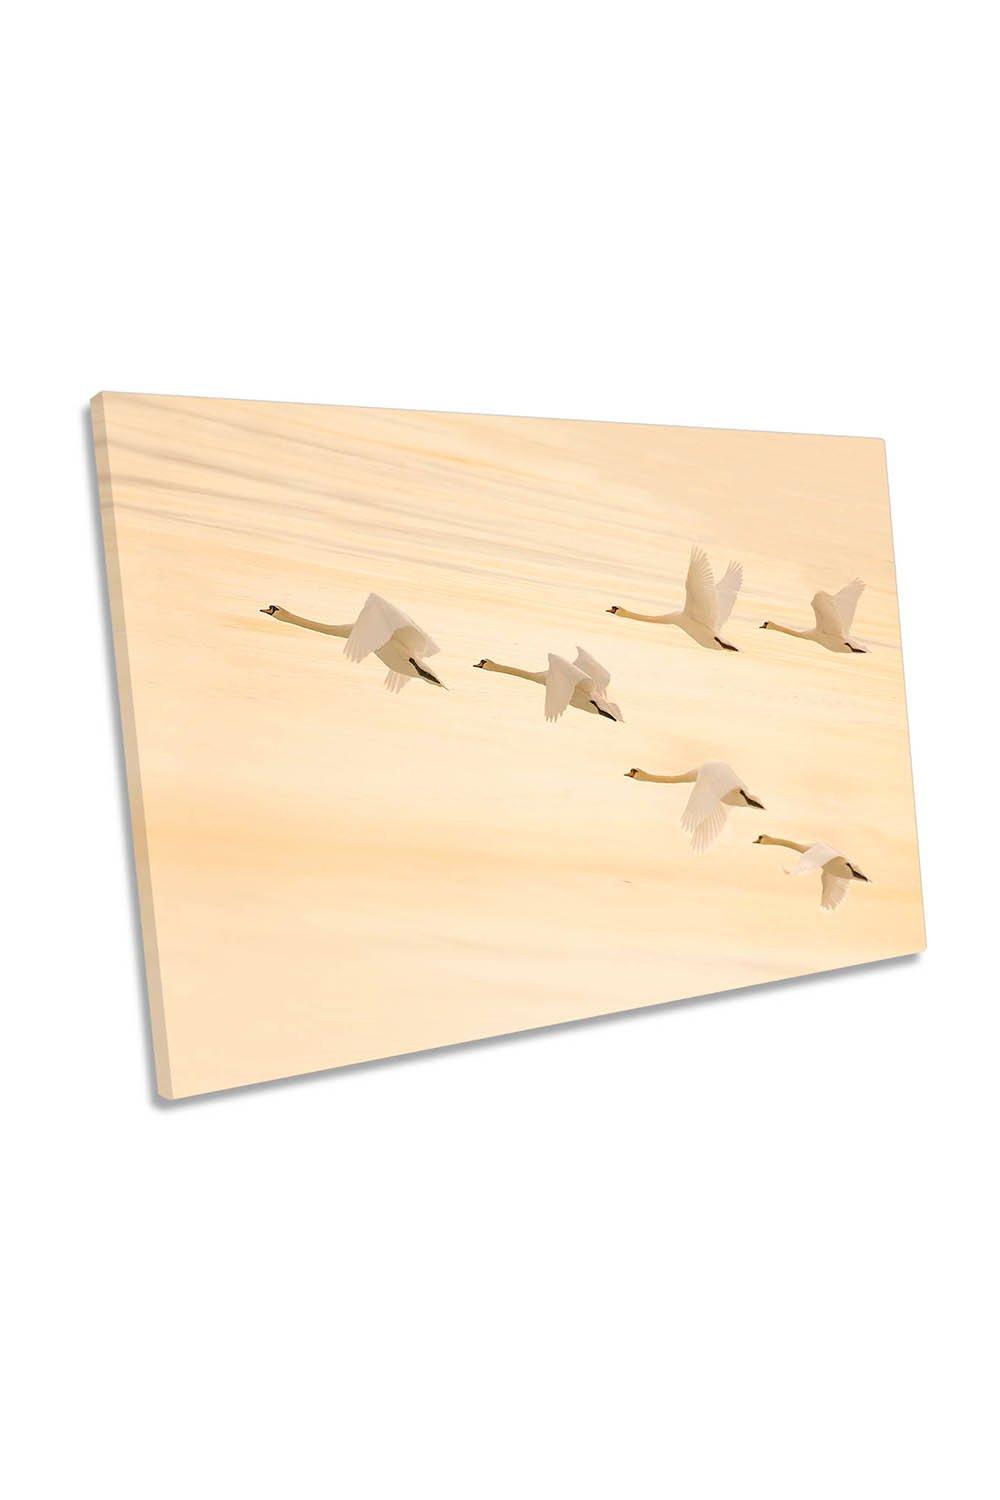 Group Formation Swans Flight Sunset Birds Canvas Wall Art Picture Print